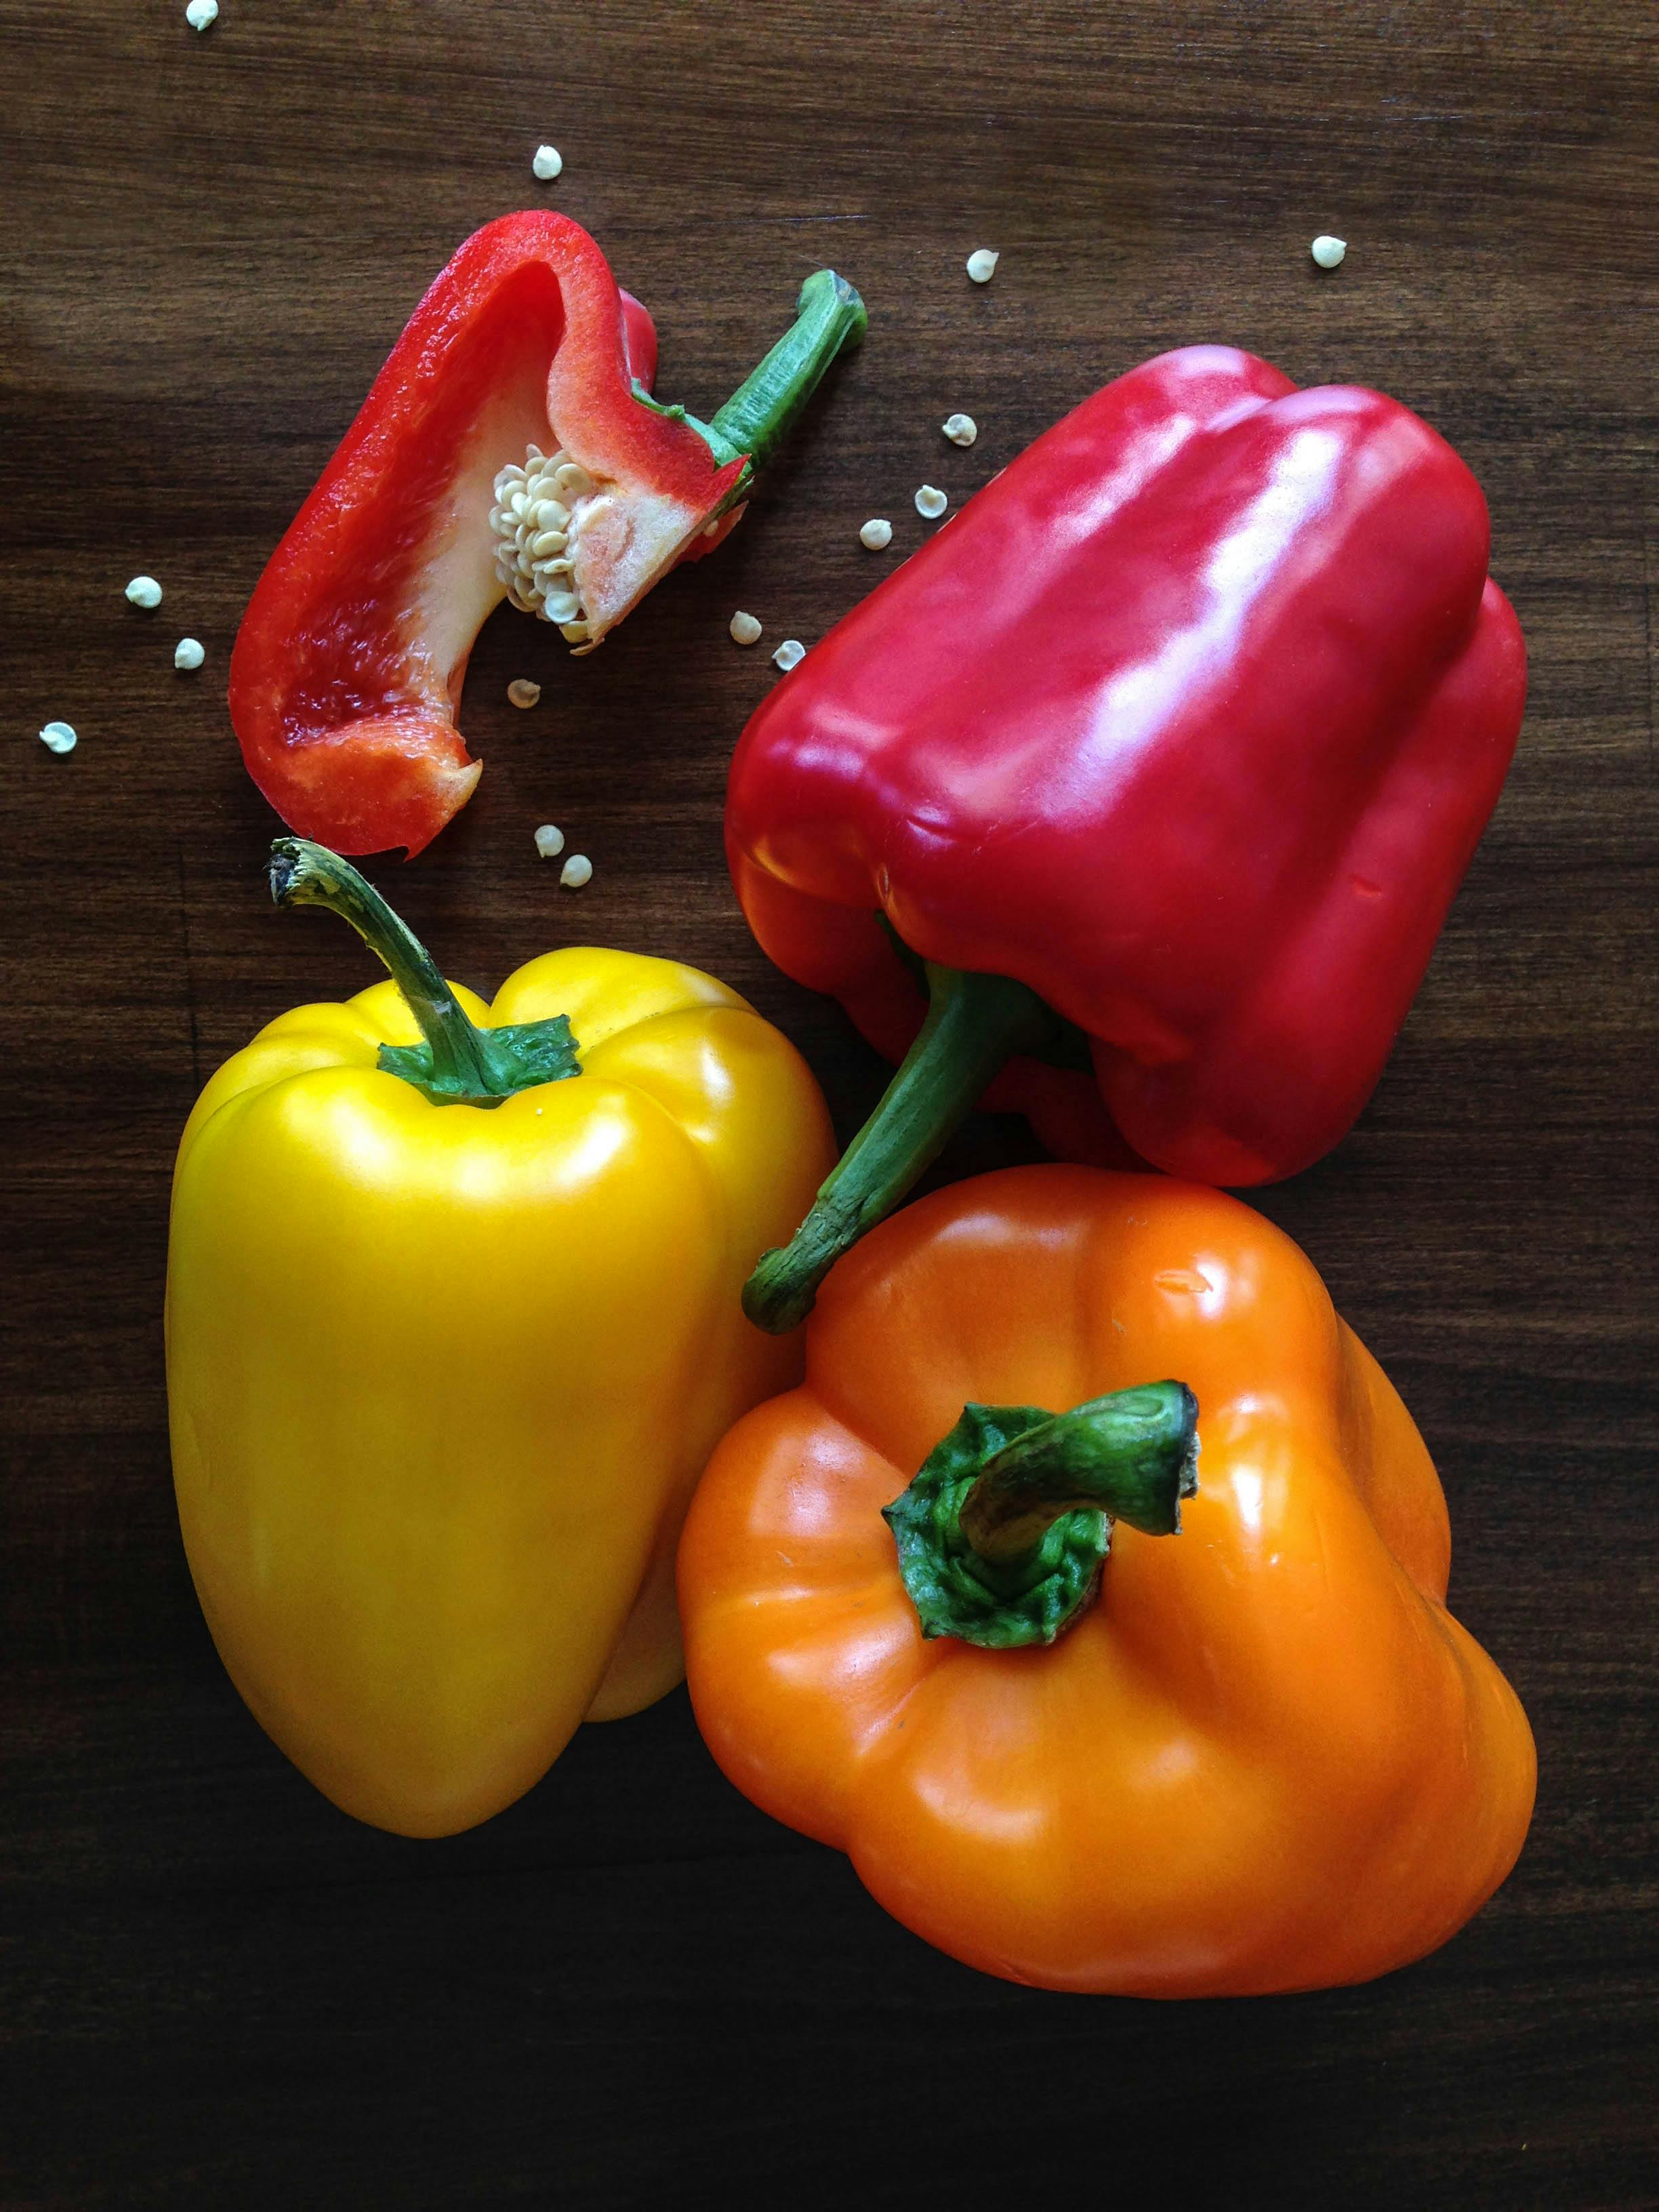 The Difference Between Red, Yellow, And Green Peppers